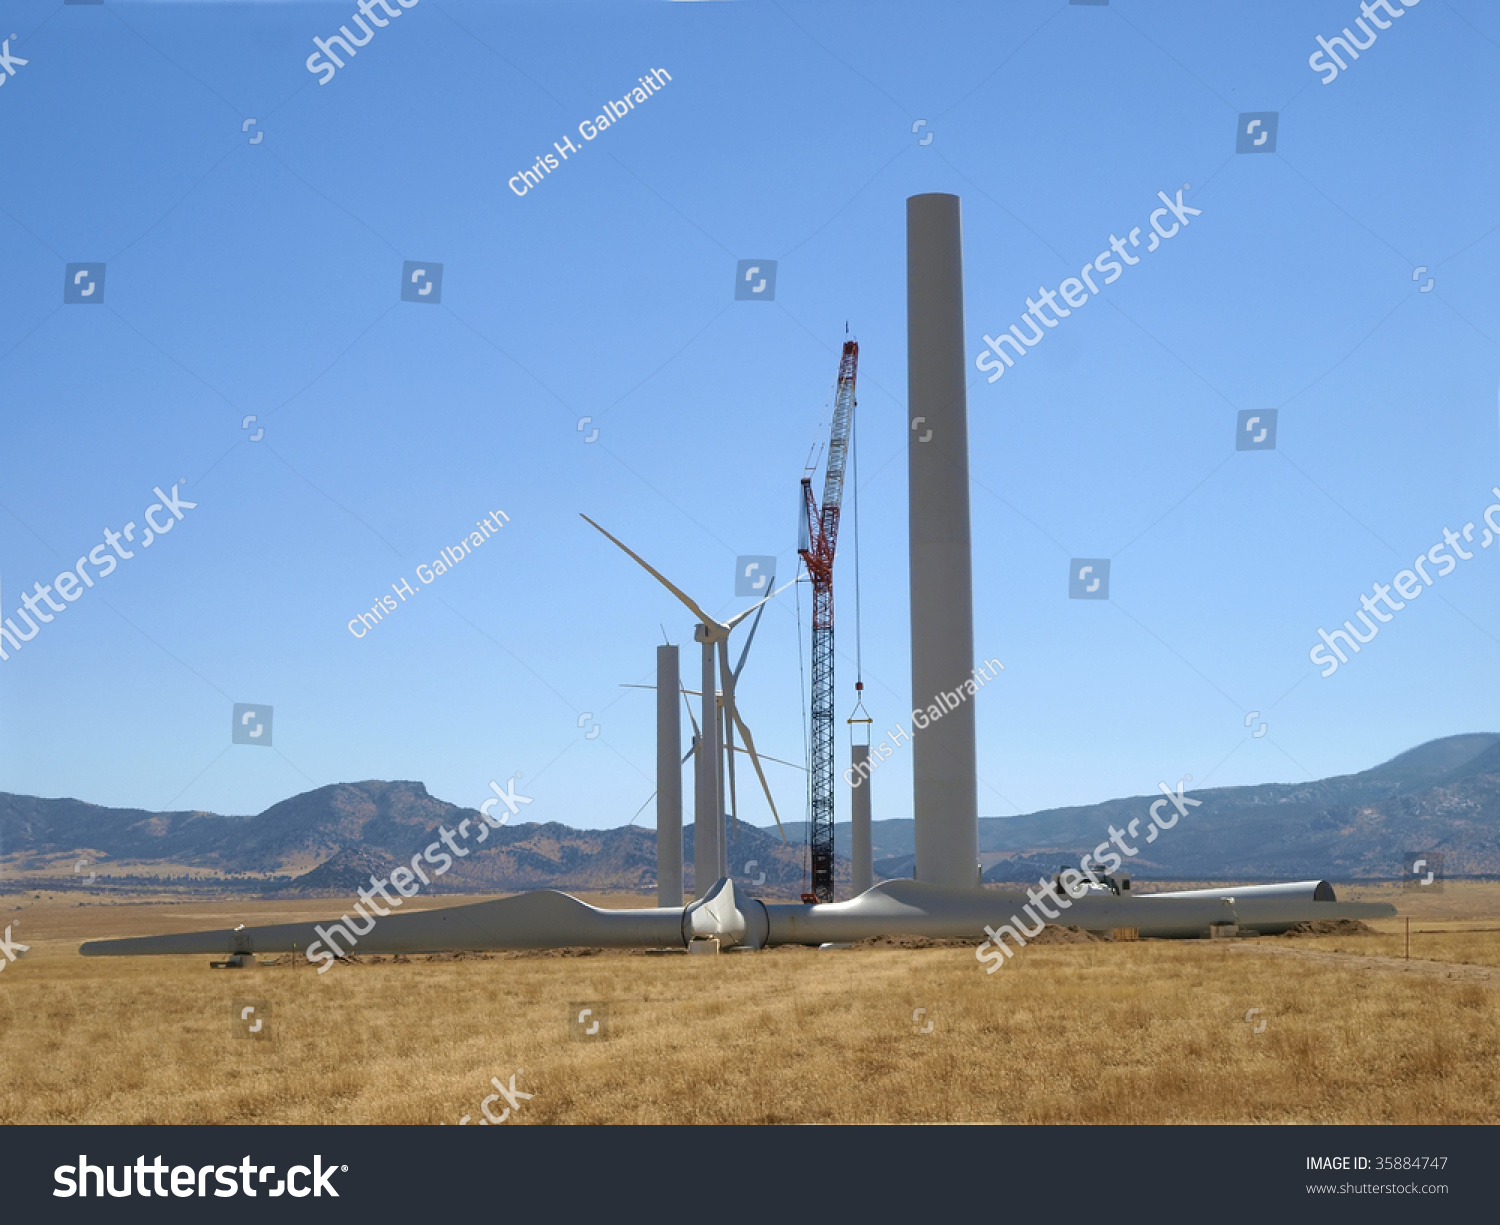 Giant Wind Turbines Being Constructed In The Desert Near ...